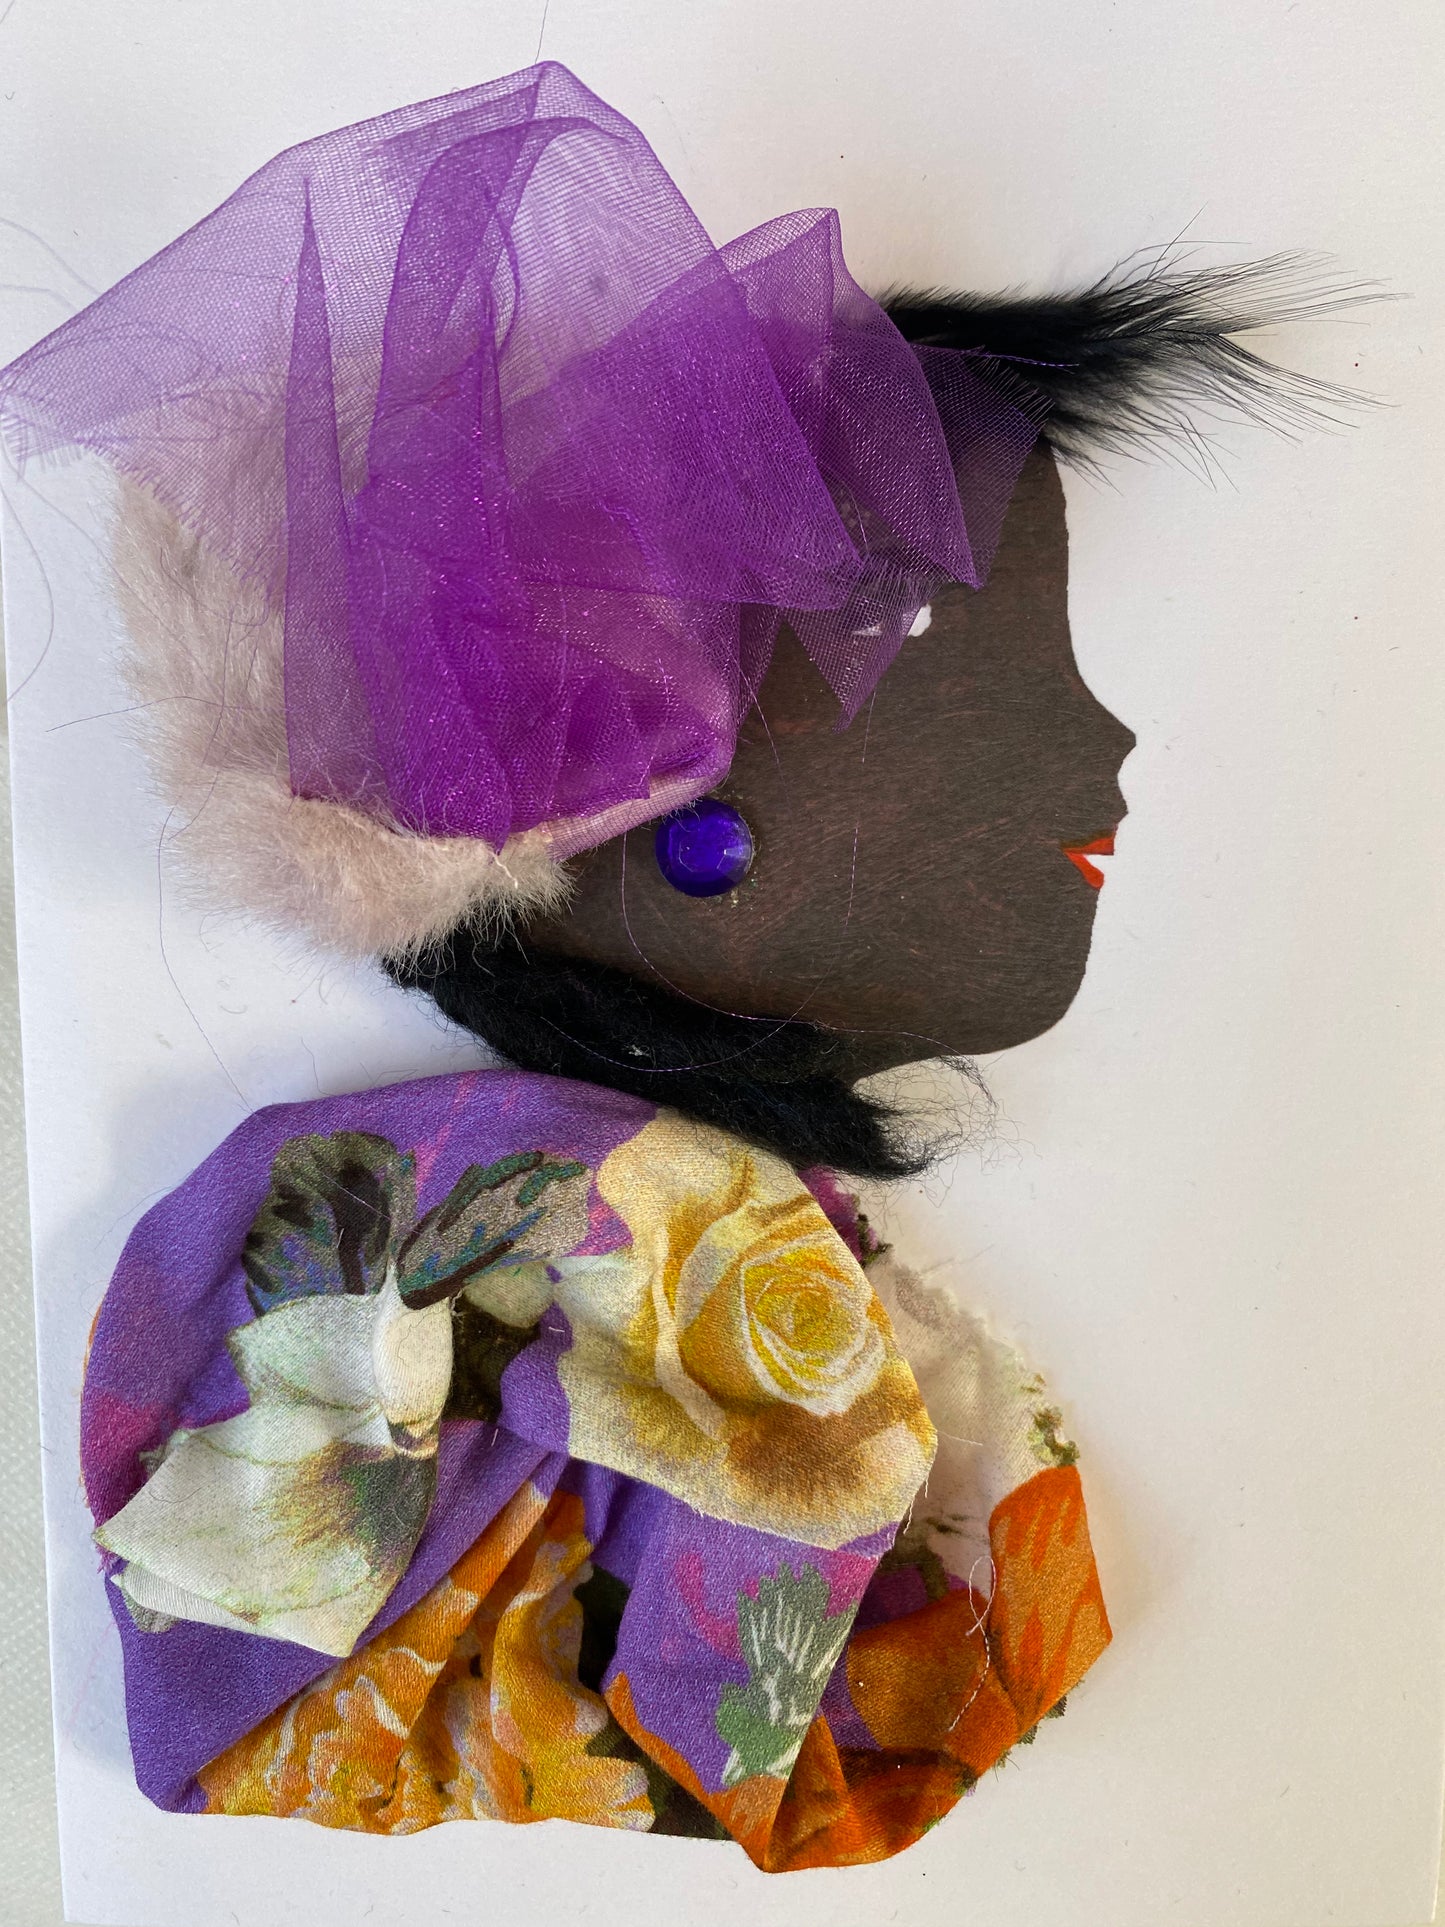 i designed this card of a woman who wears a furry hat with ravishing purple fabric coming out. She wears a beautiful purple floral blouse with deep purple earrings. 